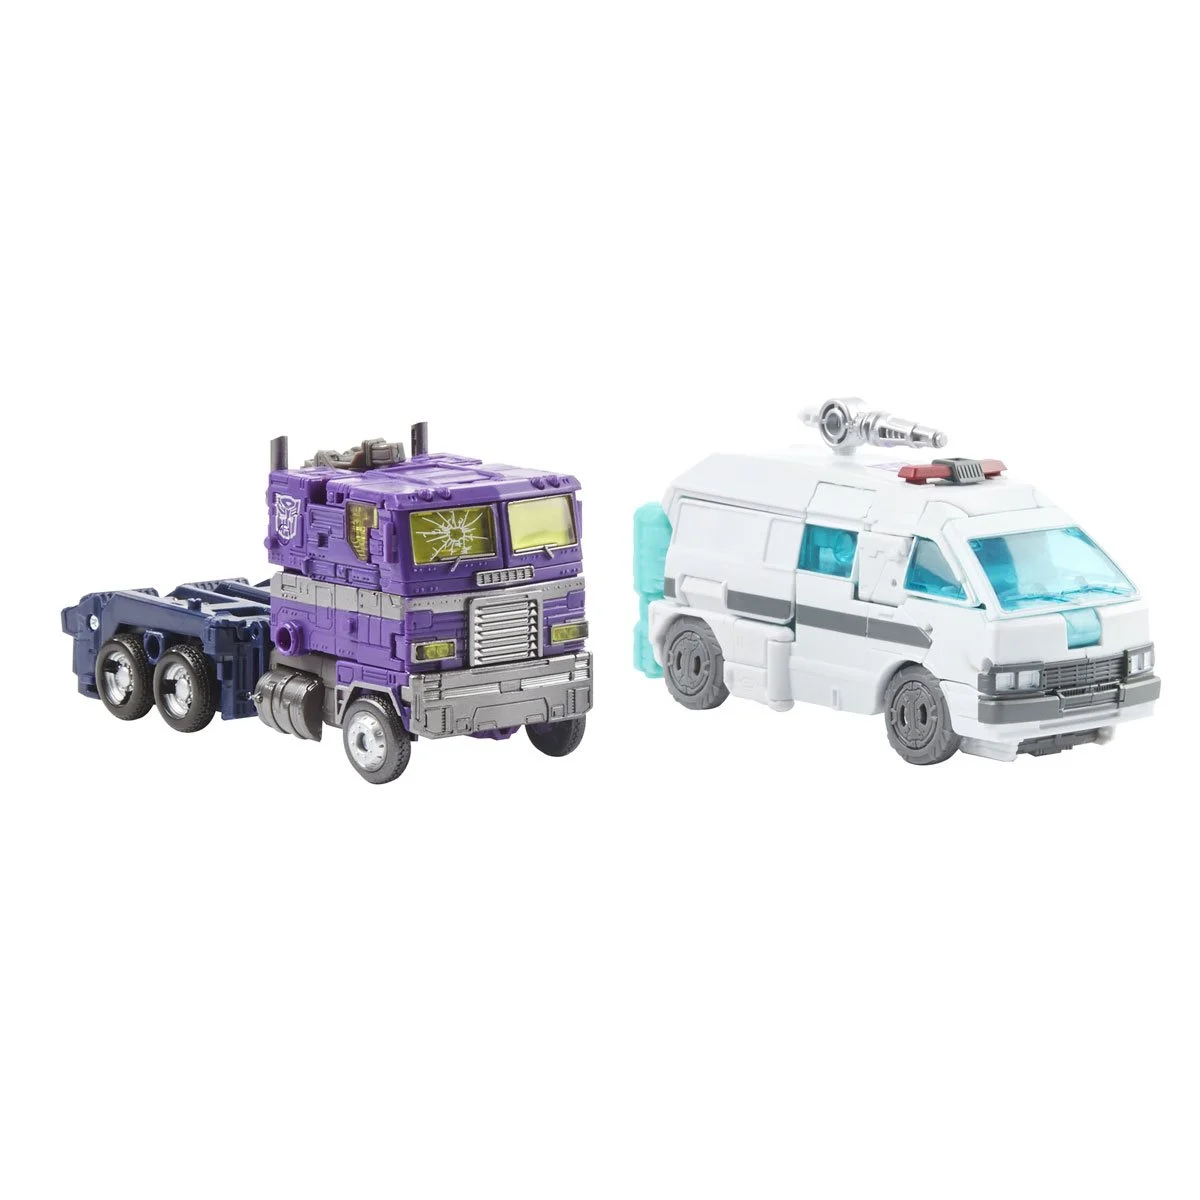 Transformers News: Generations Selects Shattered Glass Optimus Prime & Ratchet 2-Pack and more from Entertainment Earth